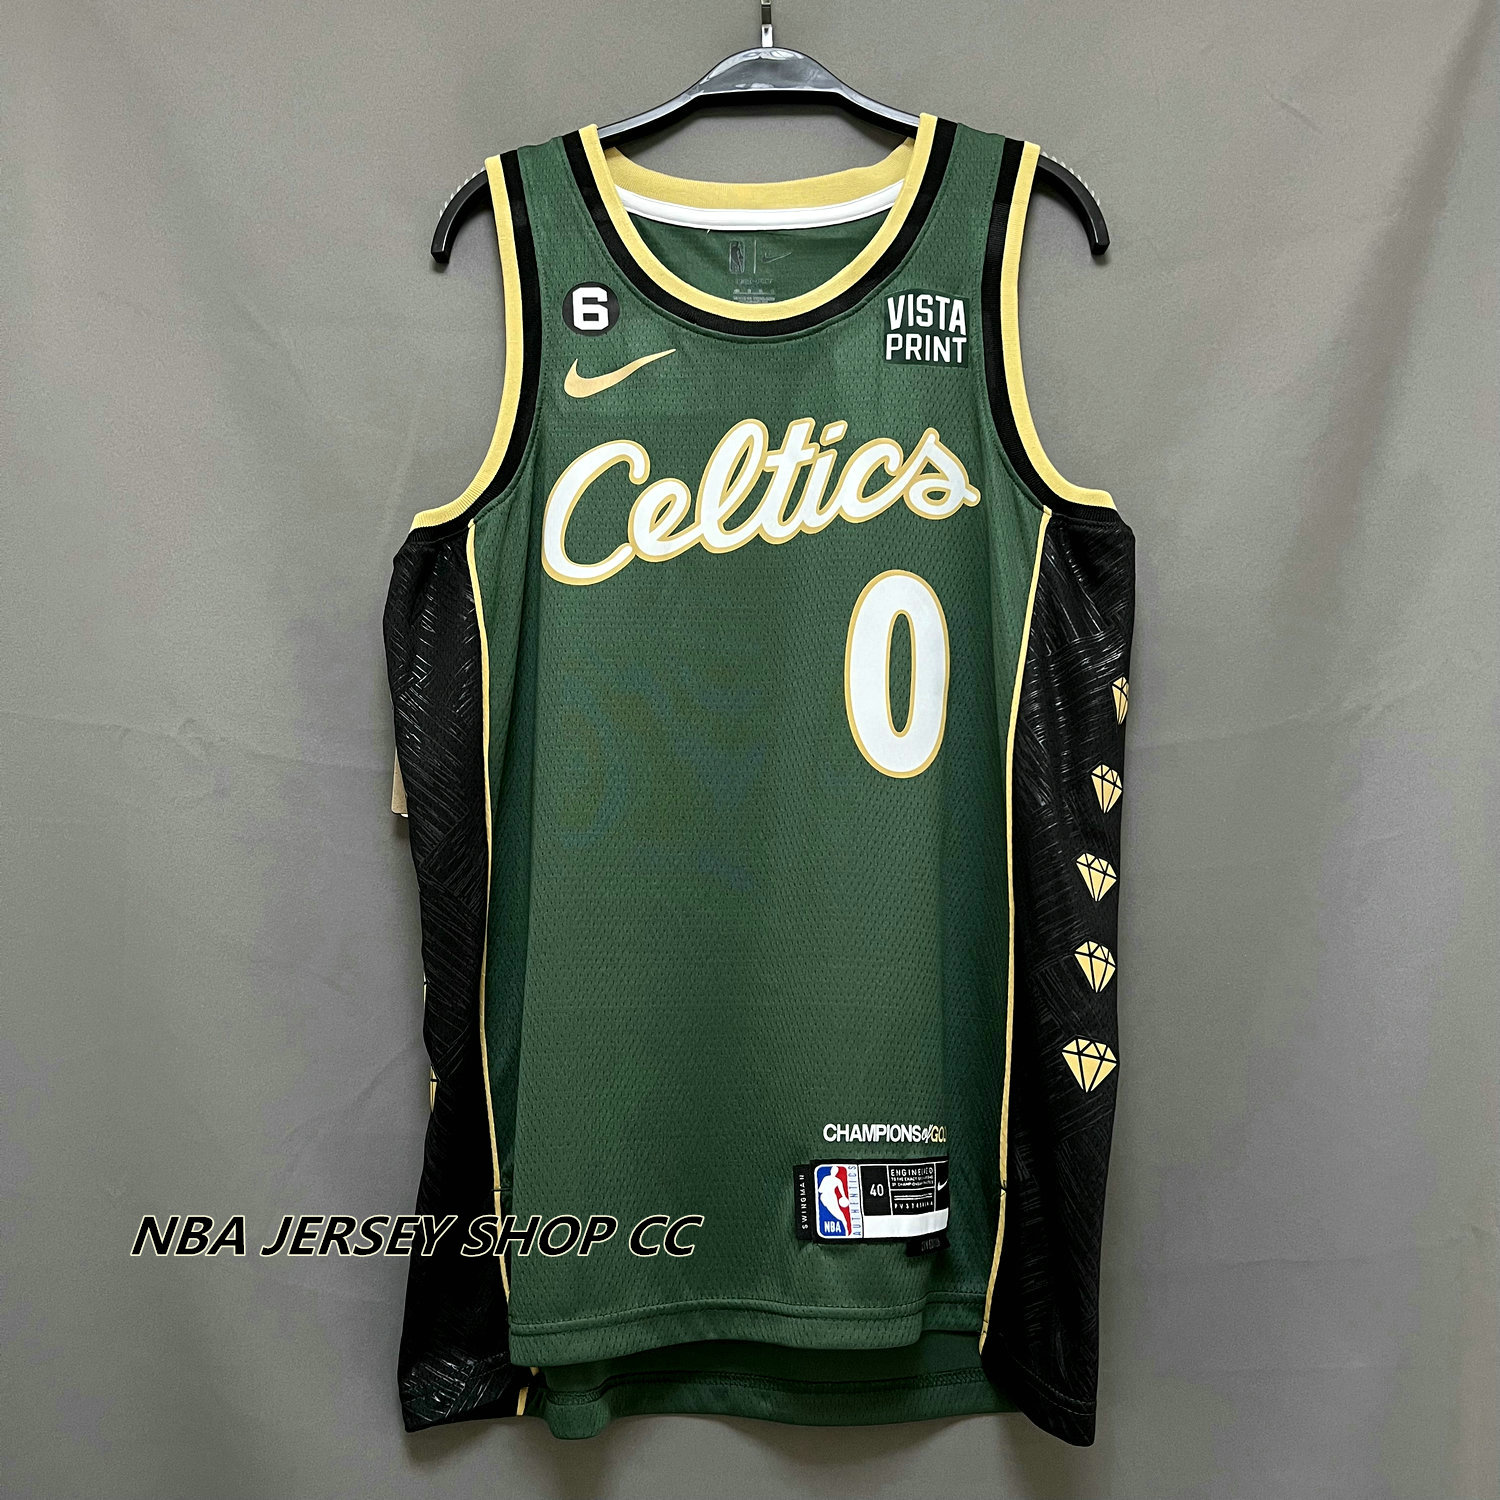 Marcus Smart Boston Celtics Game-Used #36 Green Jersey Worn During the  Second Half of the Game vs. New York Knicks on November 5 2022